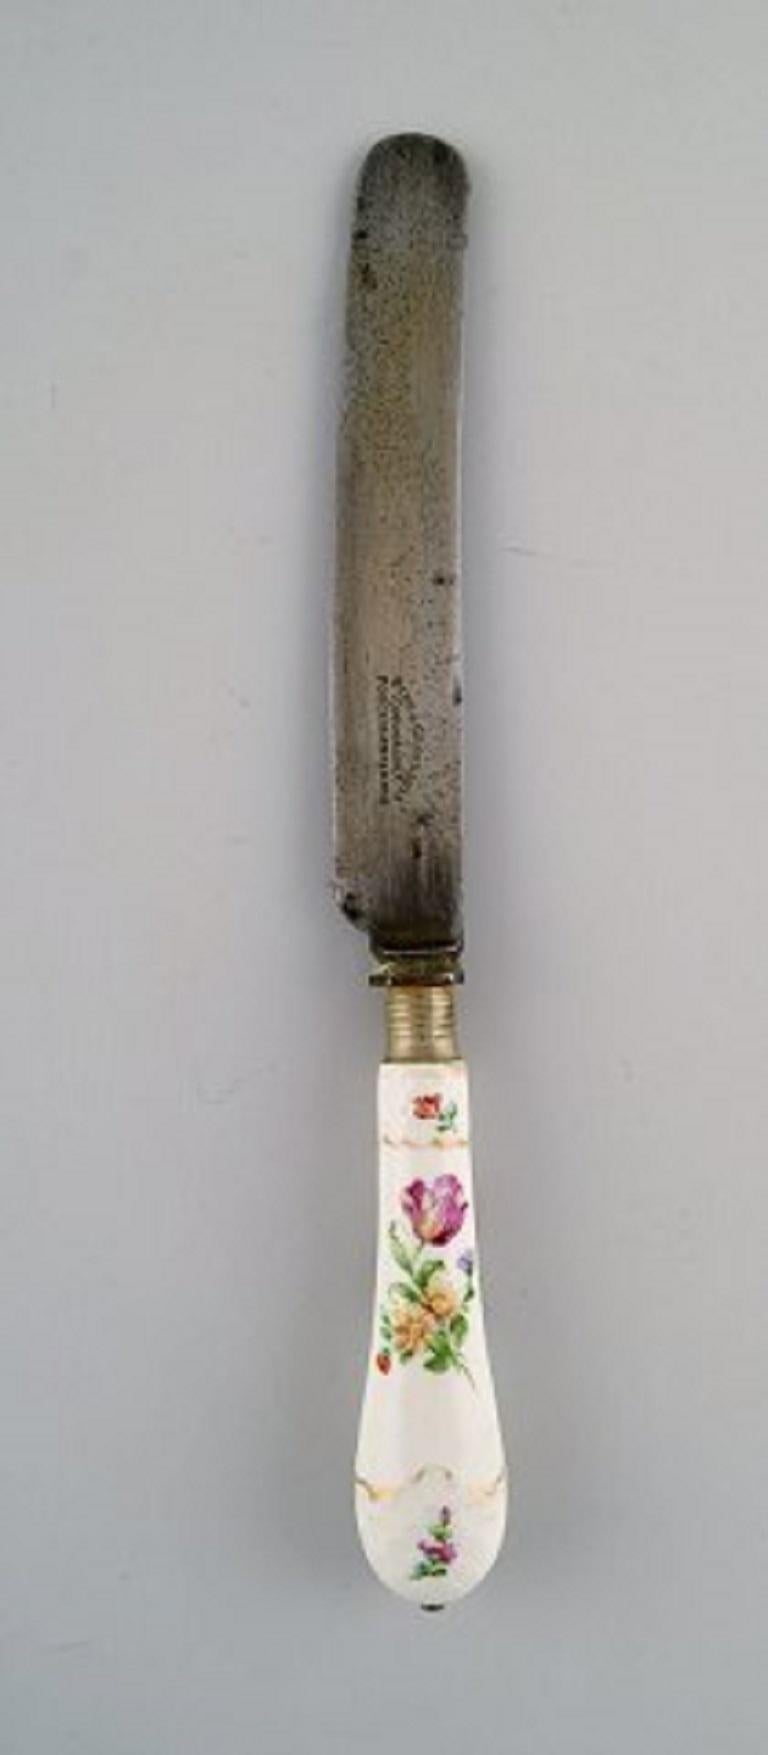 B & G, Bing & Grøndahl Saxon flower. Set of 8 antique large dinner knives.
1st factory quality. In very good condition.
Early stamp, circa 1900.
Measures: 27.5 cm.